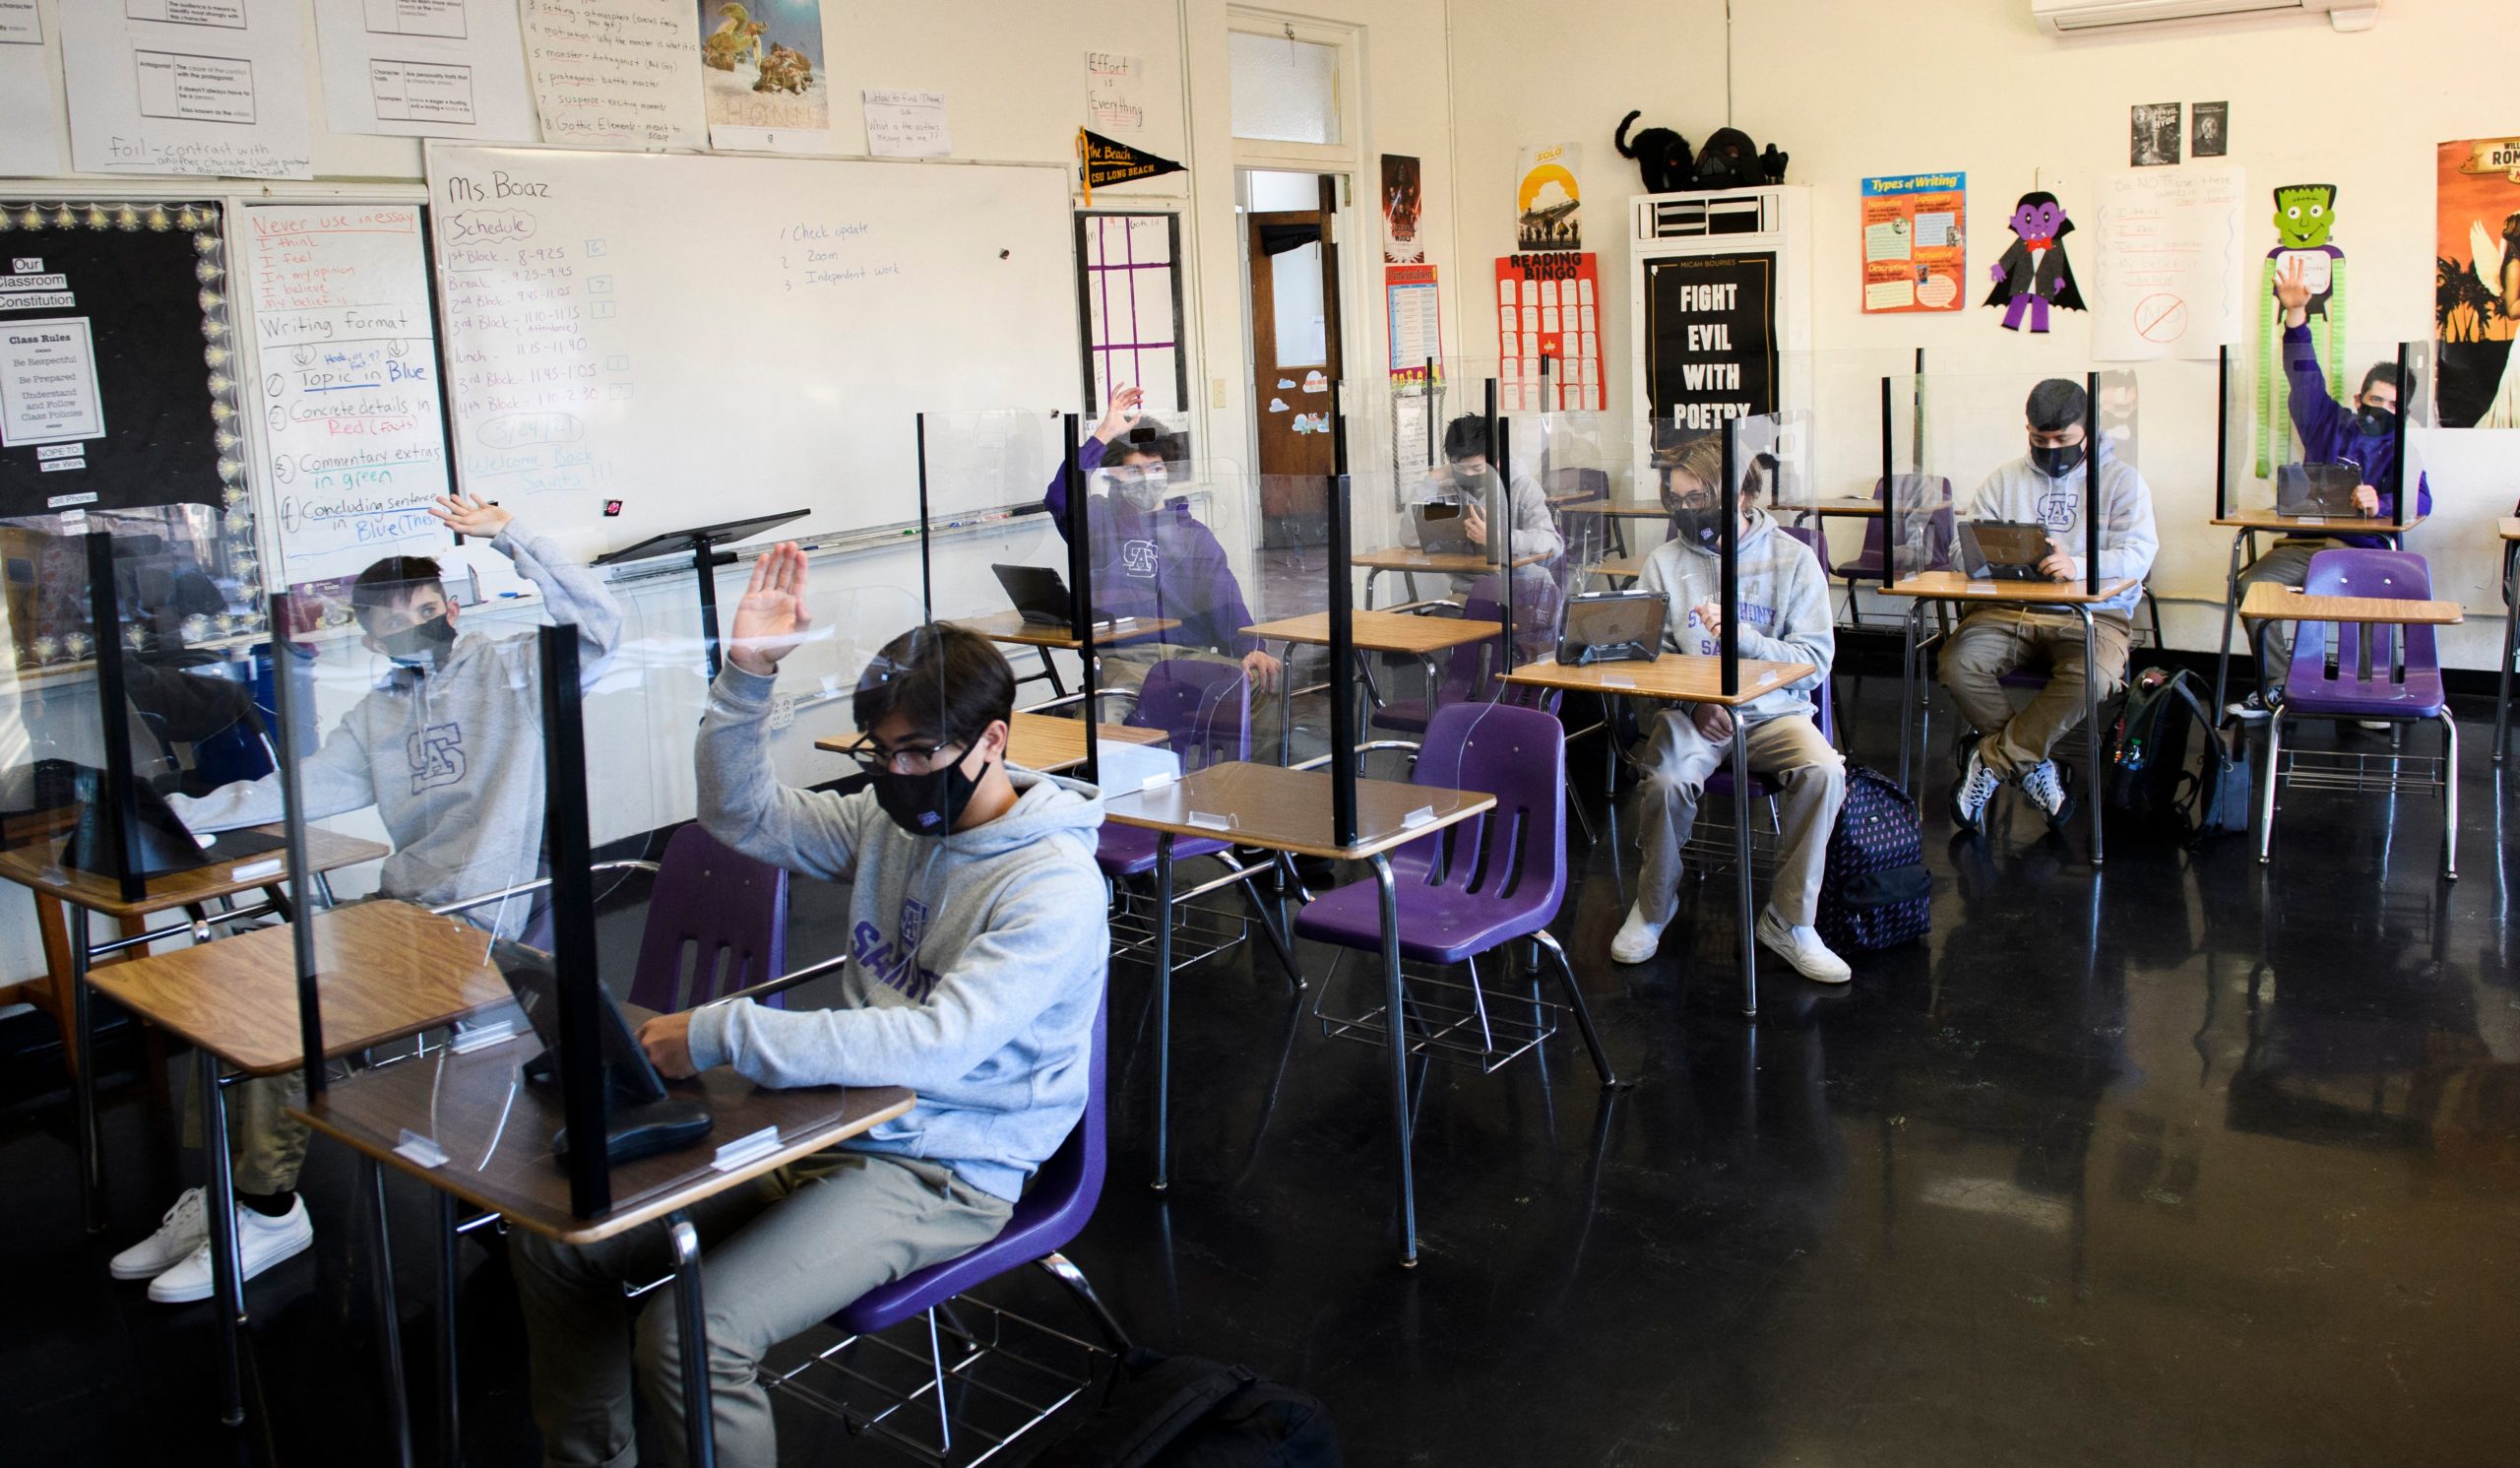 Students attend an in-person English class at St. Anthony Catholic High School during the Covid-19 pandemic on March 24, 2021 in Long Beach, California. (Photo by PATRICK T. FALLON/AFP via Getty Images)